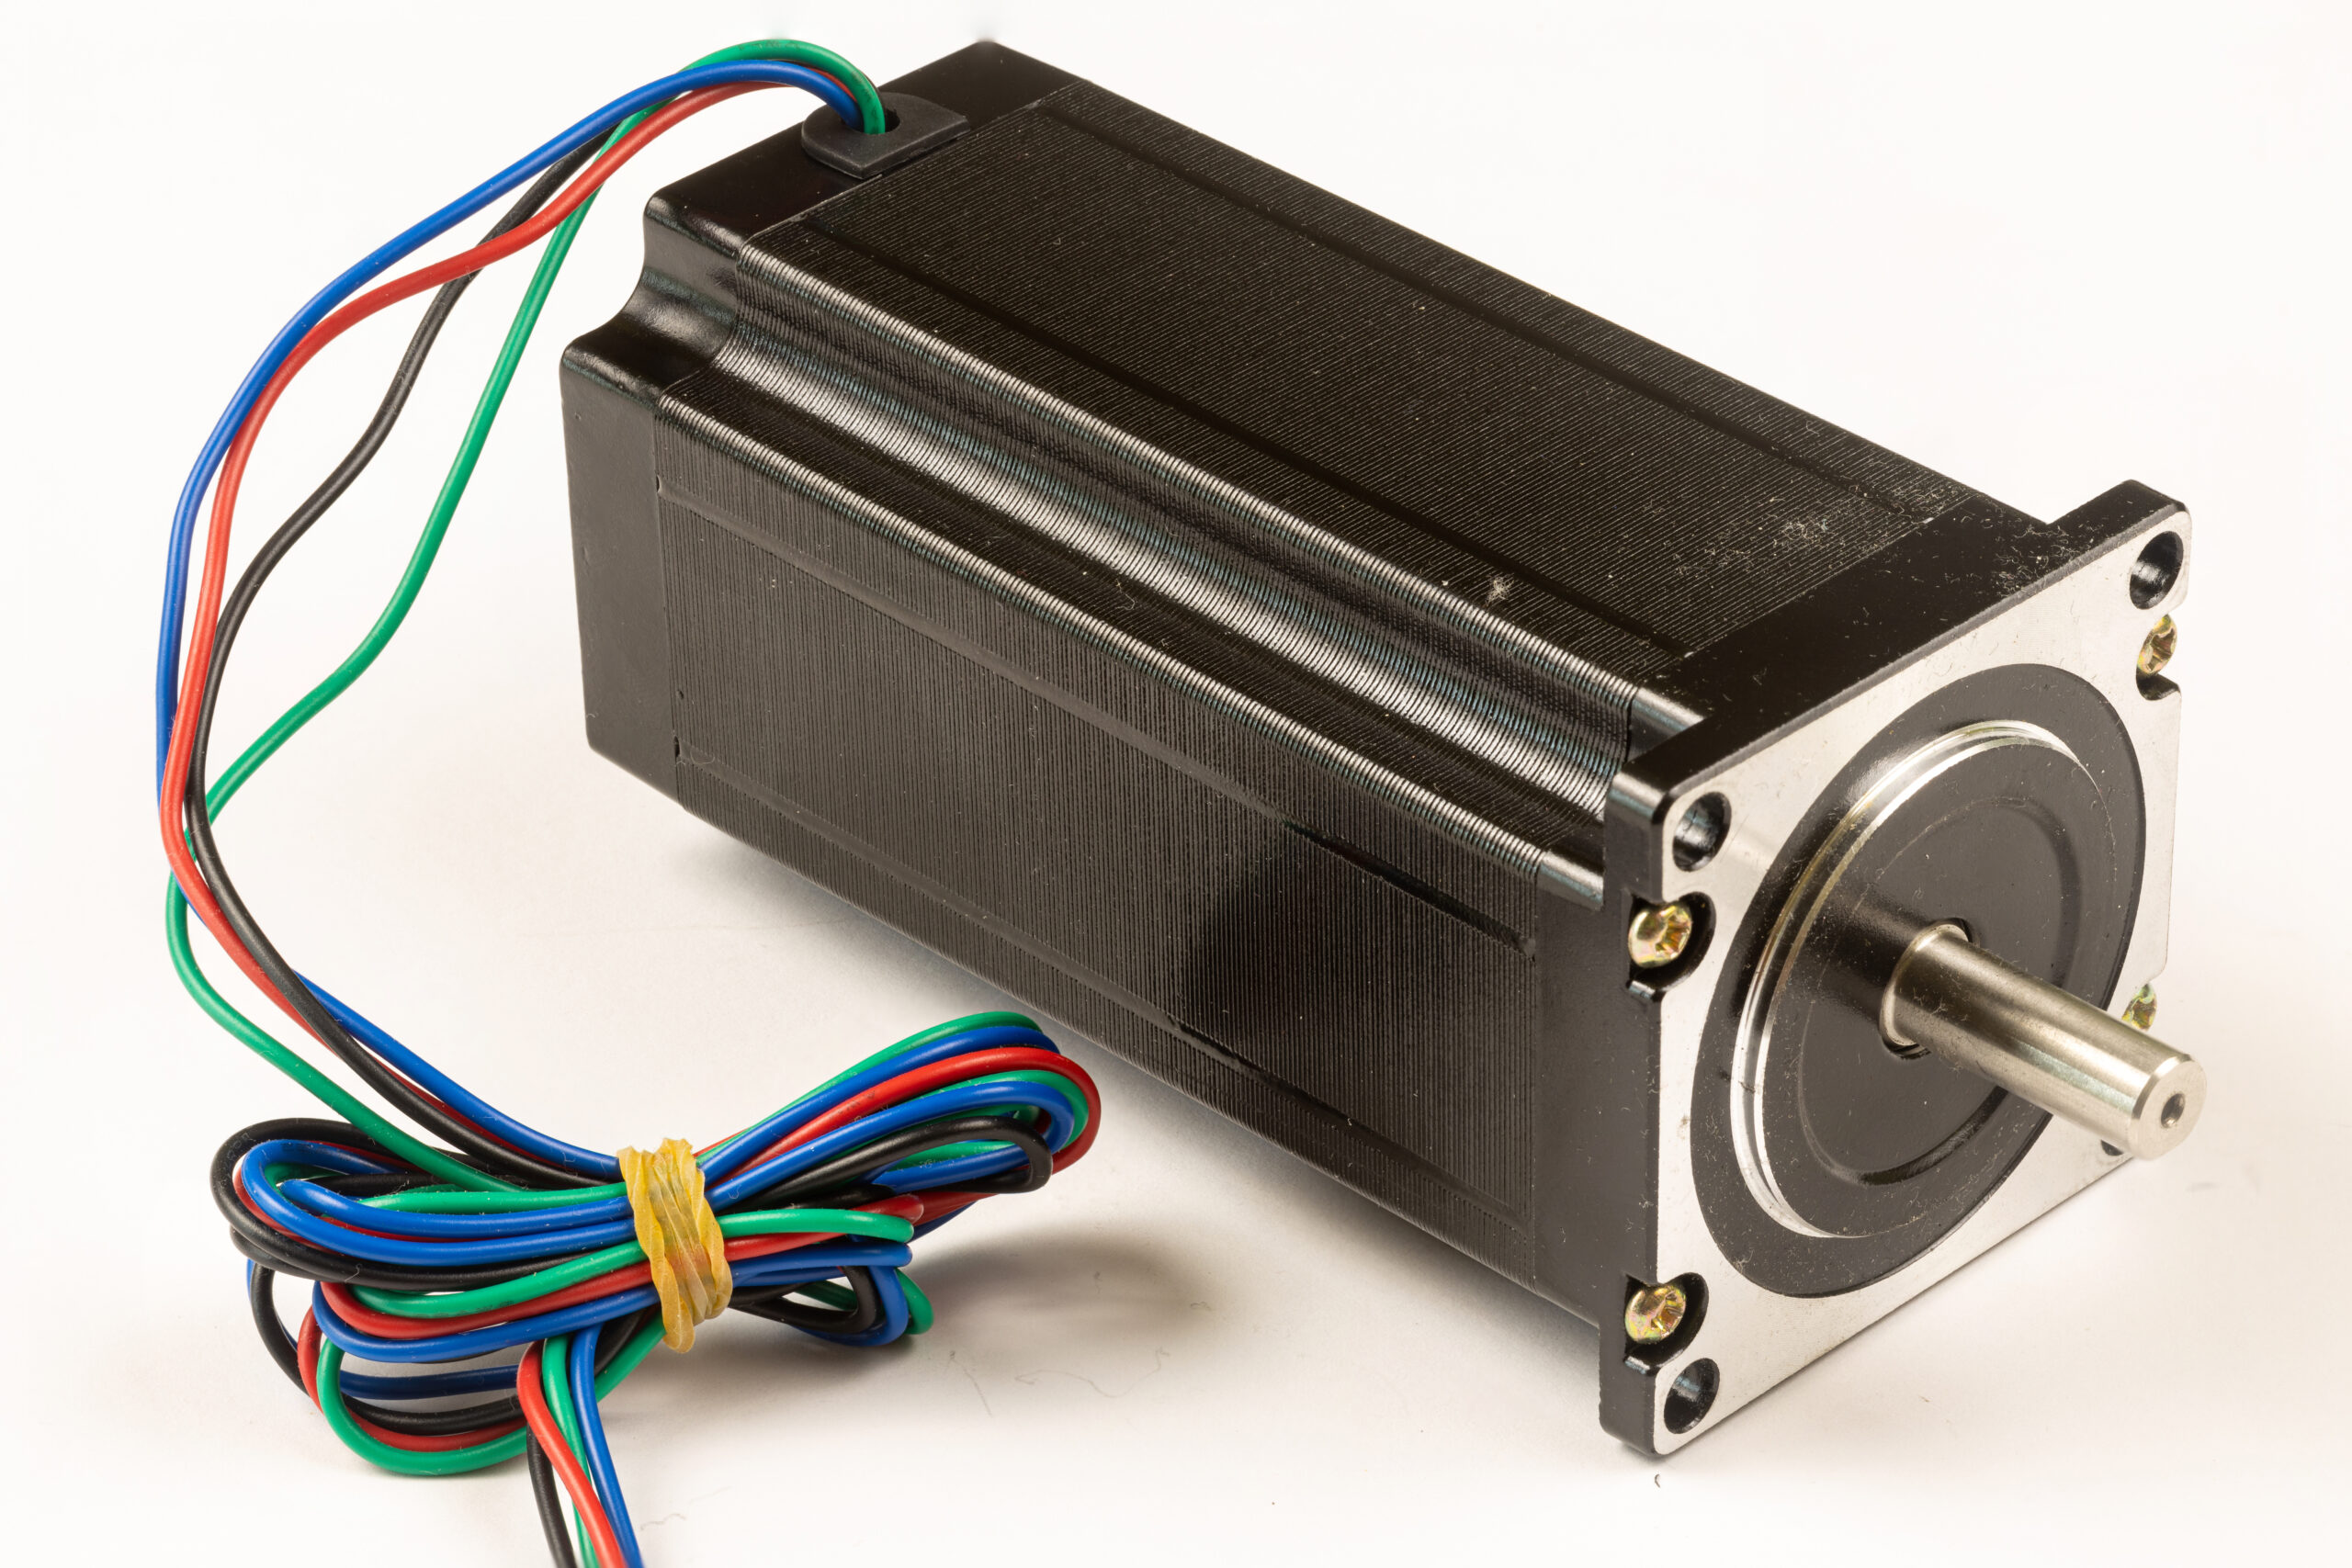 CNC microsteping stepper motor isolated above white background.